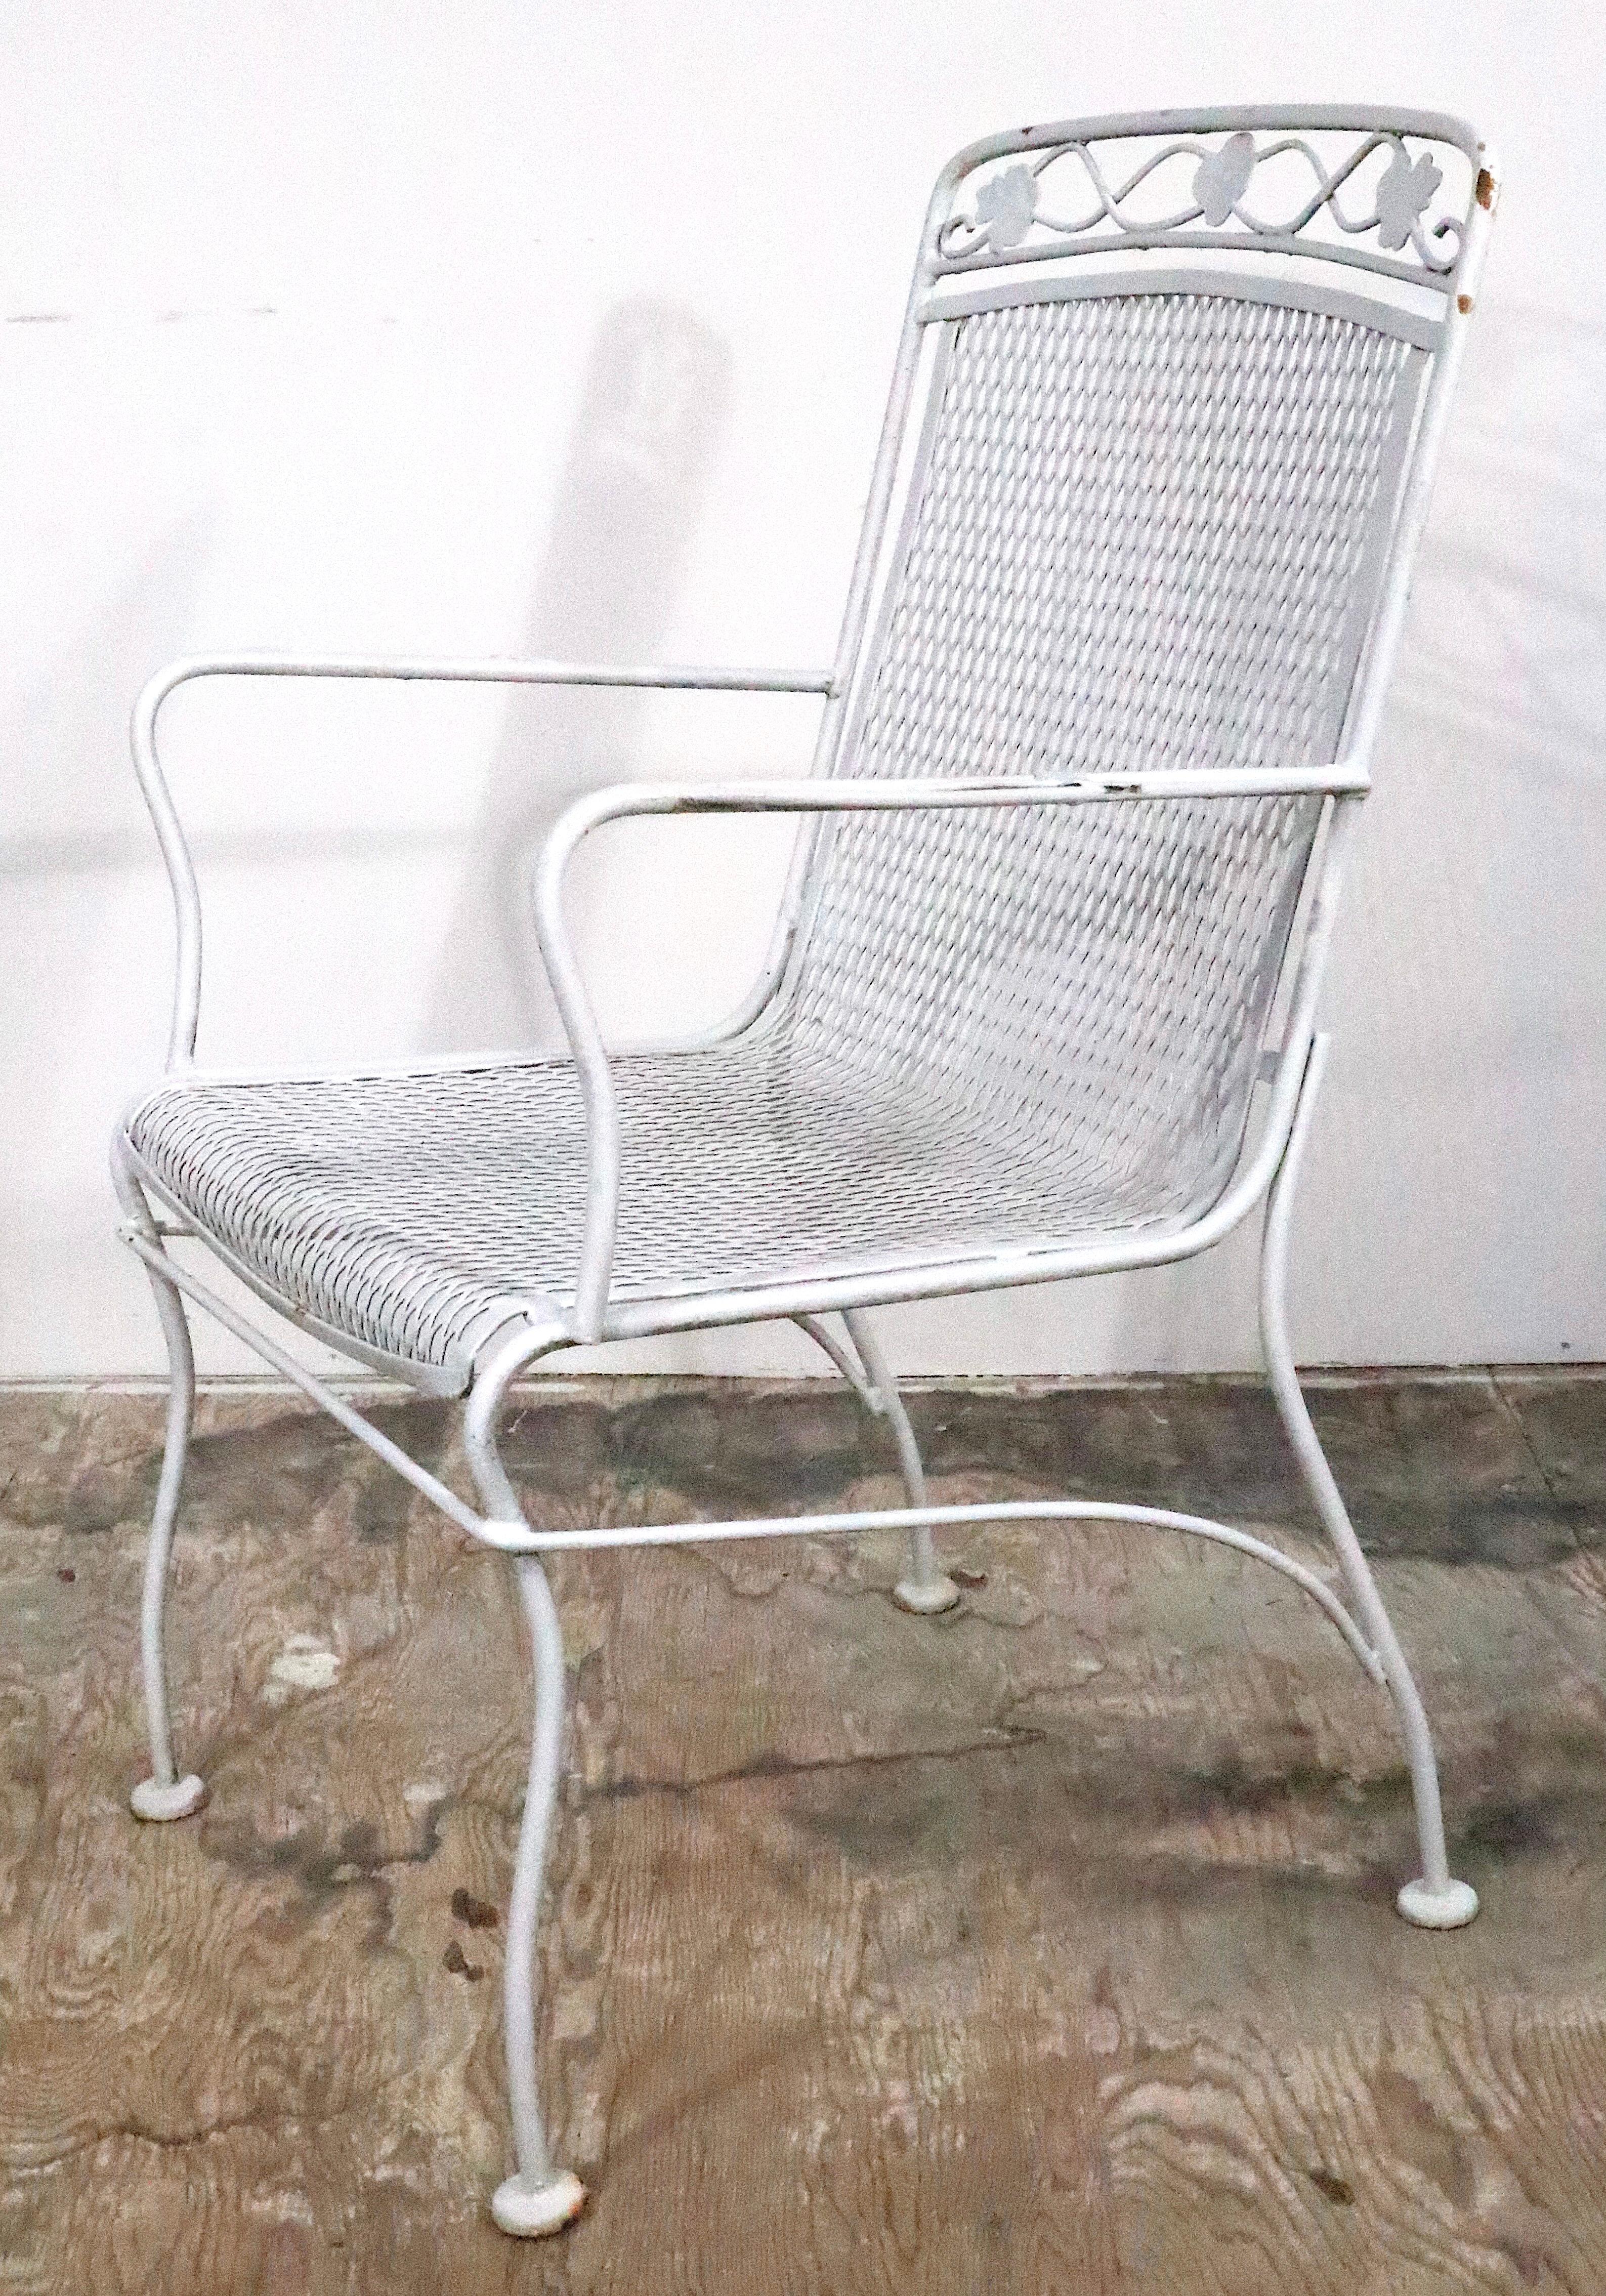 Pr. Wrought Iron Metal Mesh Garden Patio Poolside Chairs by Woodard c. 1950/70's In Good Condition For Sale In New York, NY